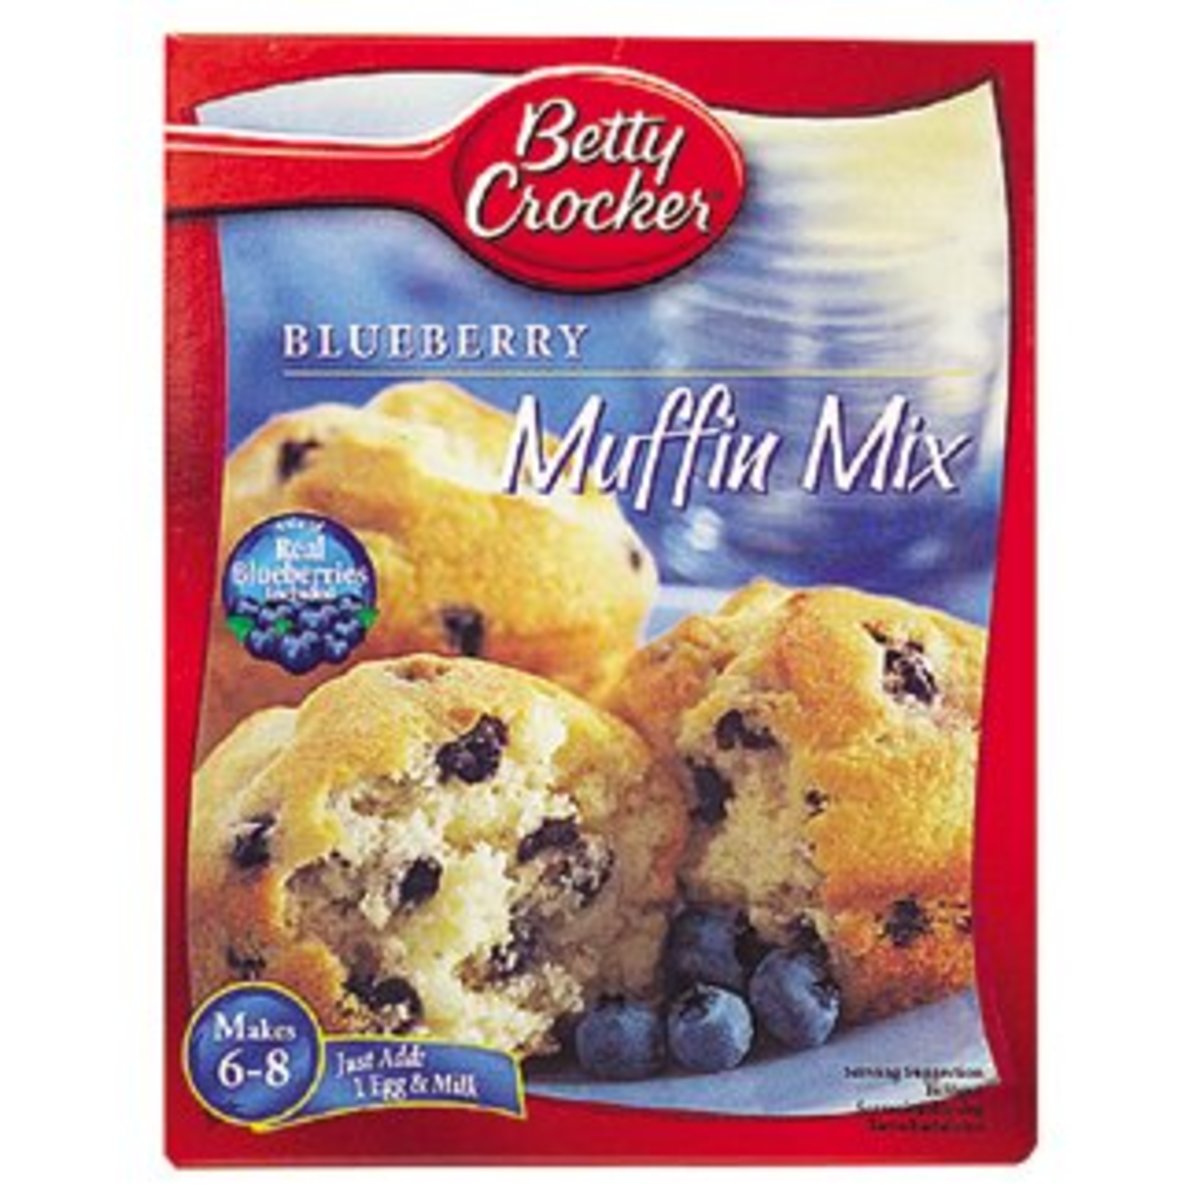 15 Ways To Doctor Blueberry Muffin Mix